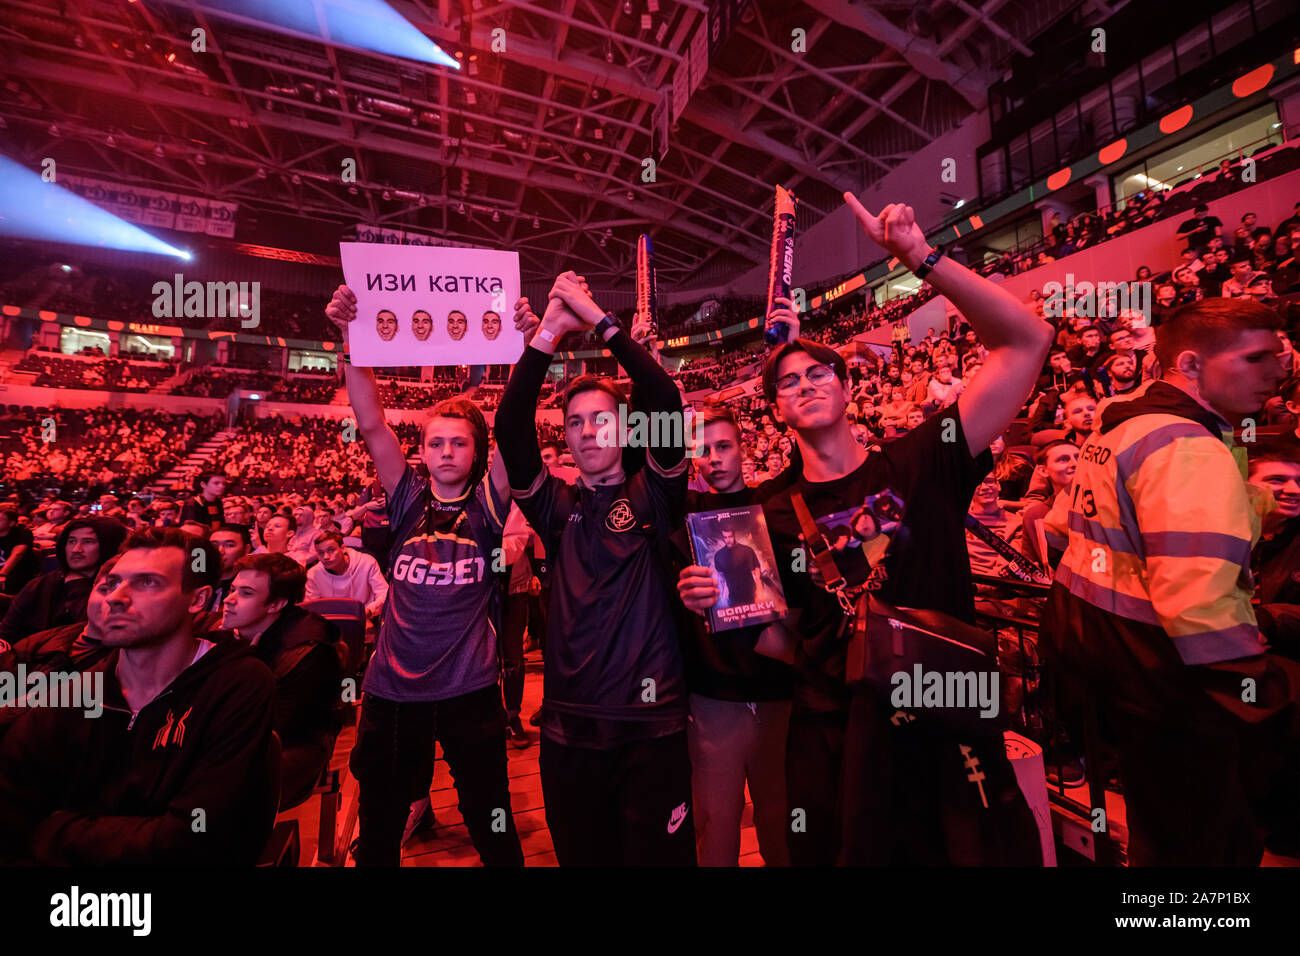 Editorial image of a Counter Strike: Global Offensive esports tournament event. Stock Photo